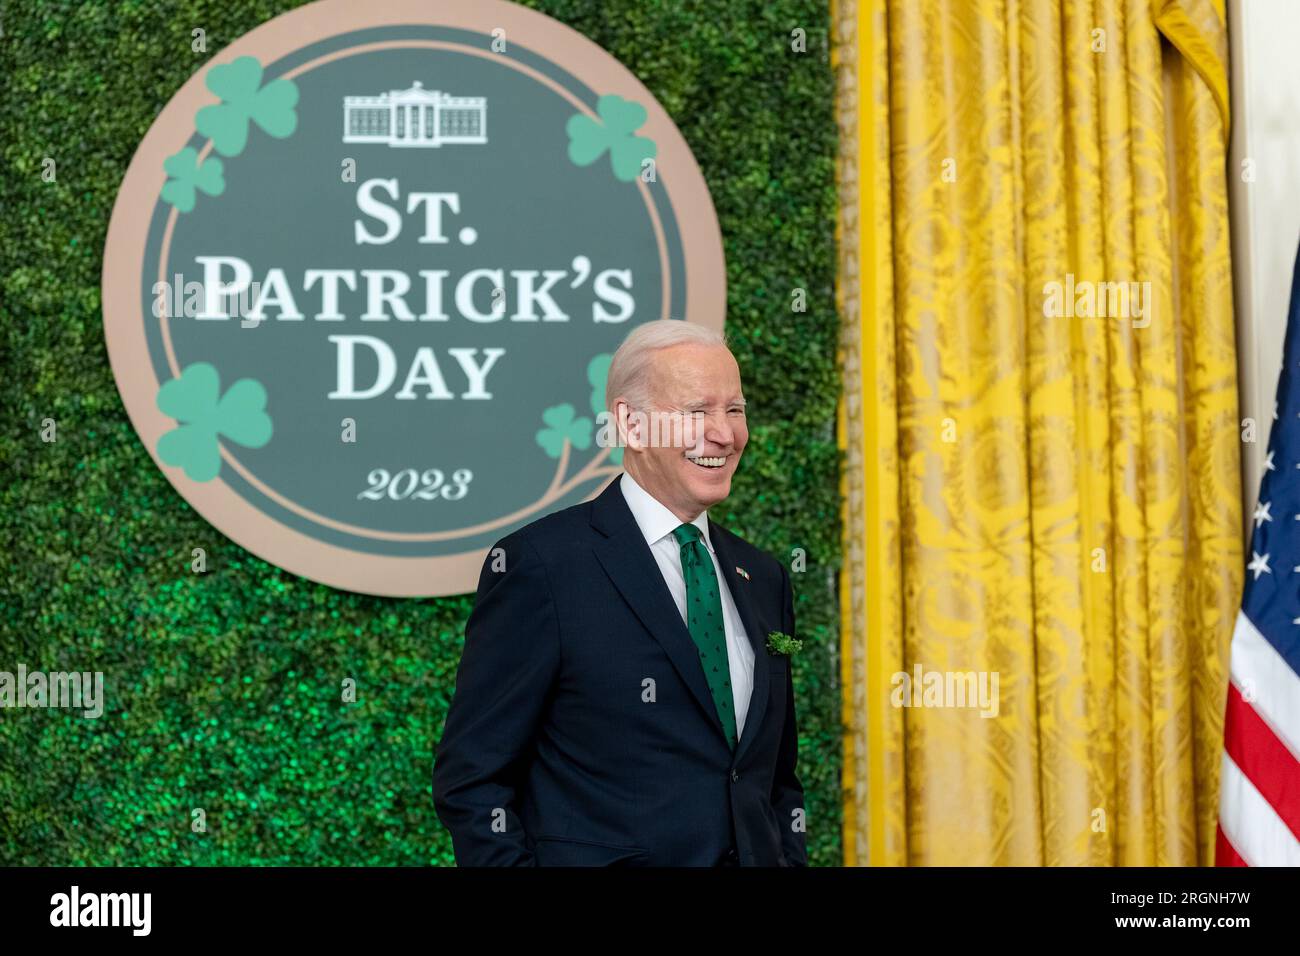 Reportage: St. Patrick's Day at the White House (2023) - President Joe Biden looks on as the Taoiseach of Ireland Leo Varadkar delivers remarks at a St. Patrick’s Day reception, Friday, March 17, 2023, in the East Room of the White House. Stock Photo